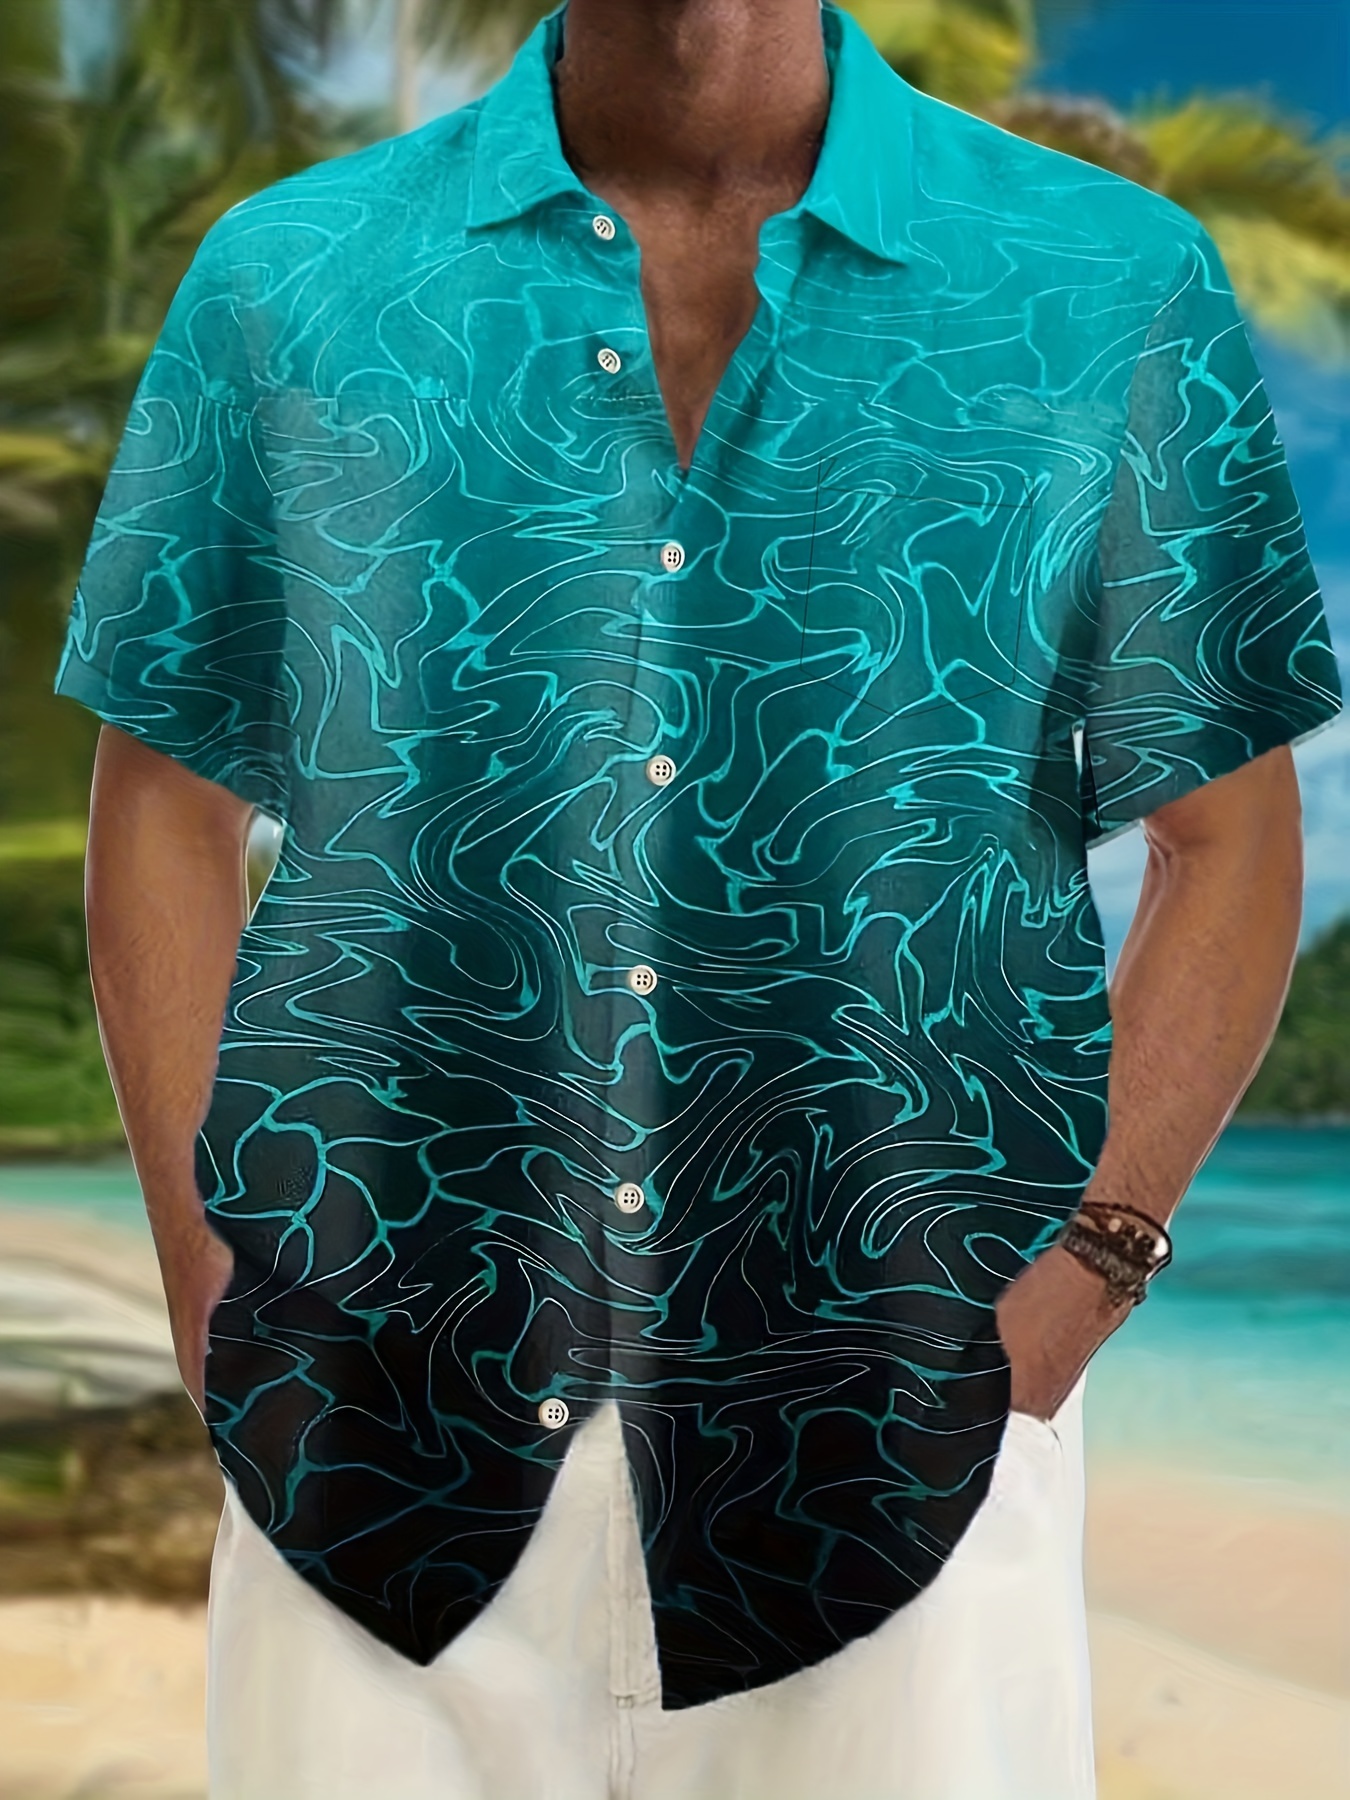 Plus Size Men's Hawaiian Shirts For Beach, Gradient Printed Short Sleeve  Aloha Shirts, Oversized Casual Loose Tops For Summer